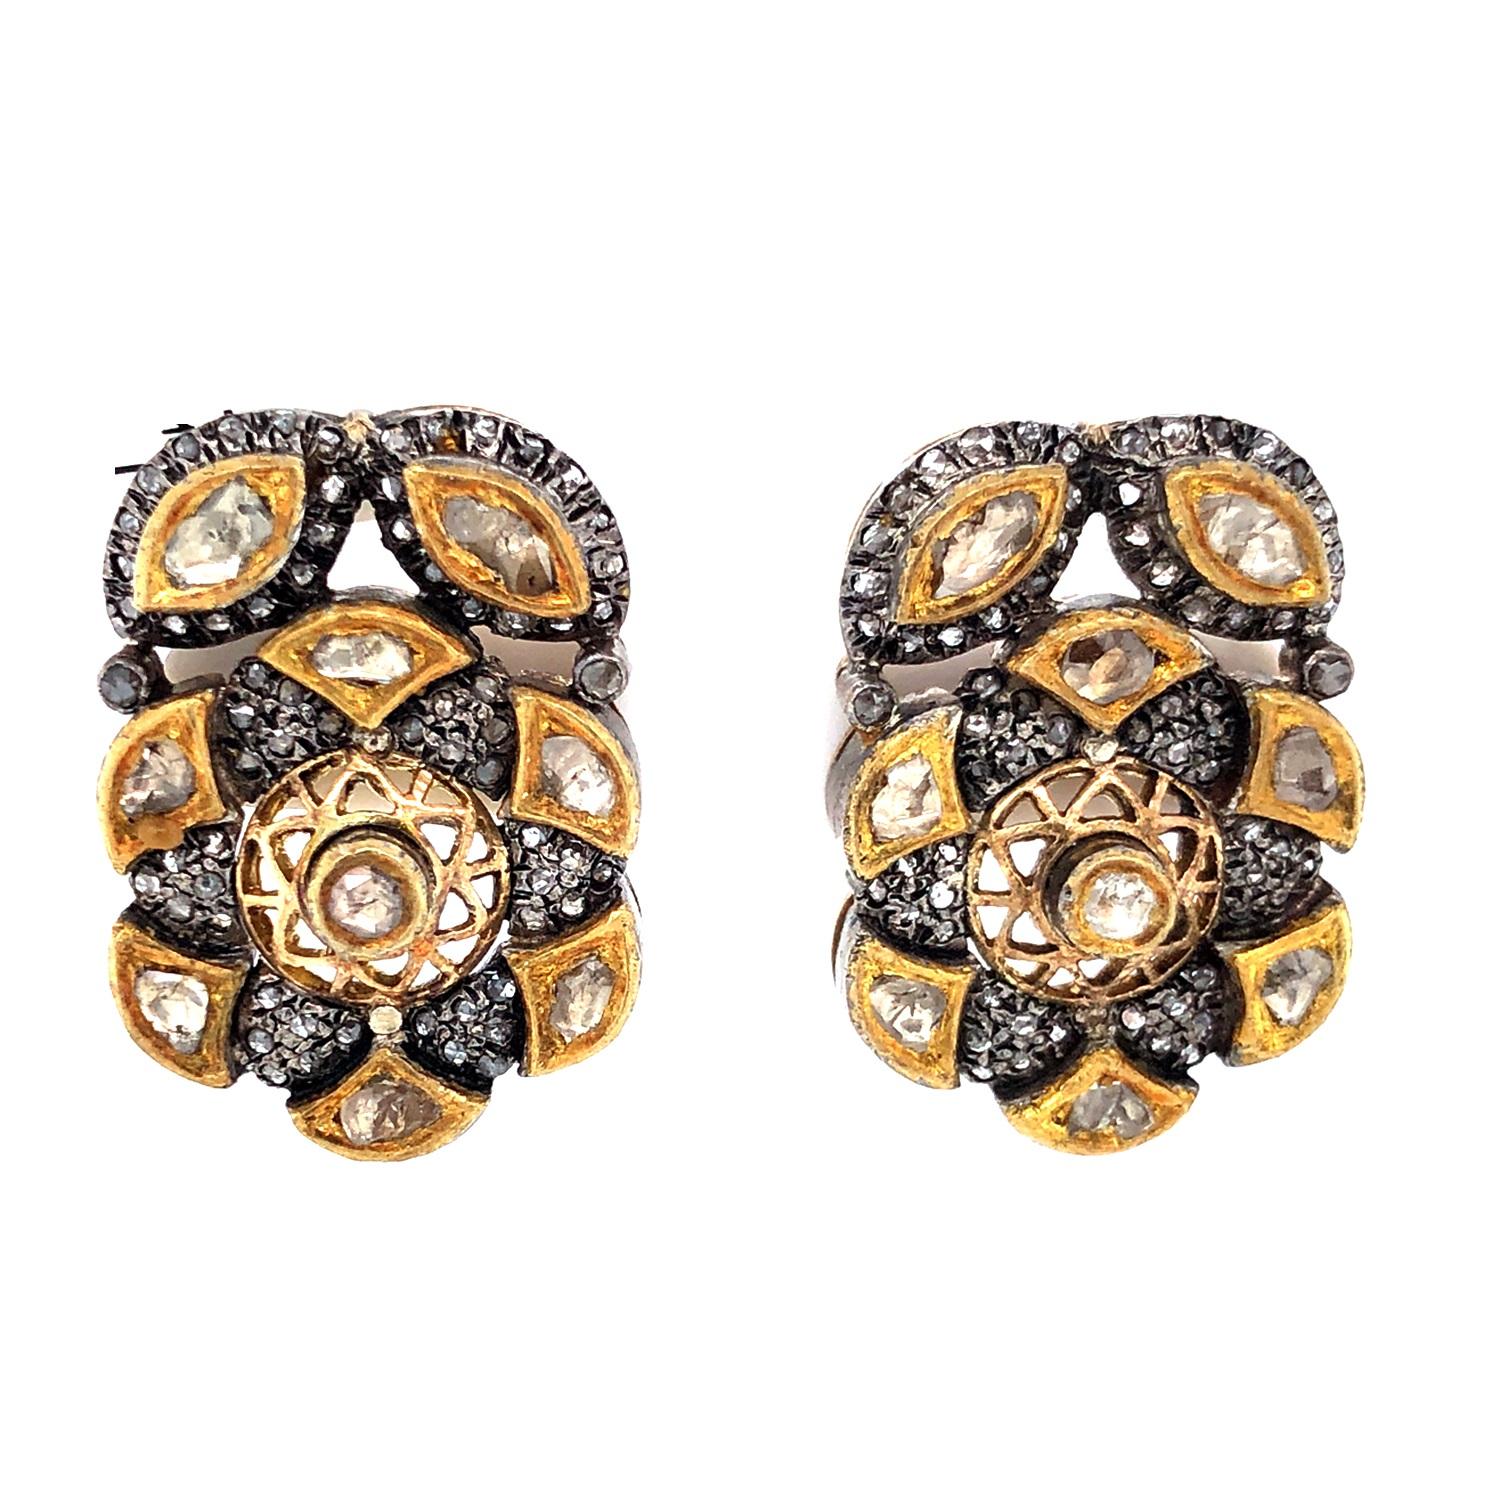 Women's Rose Cut Diamonds Studs With Filigree Work Made In Silver & 18k Gold For Sale